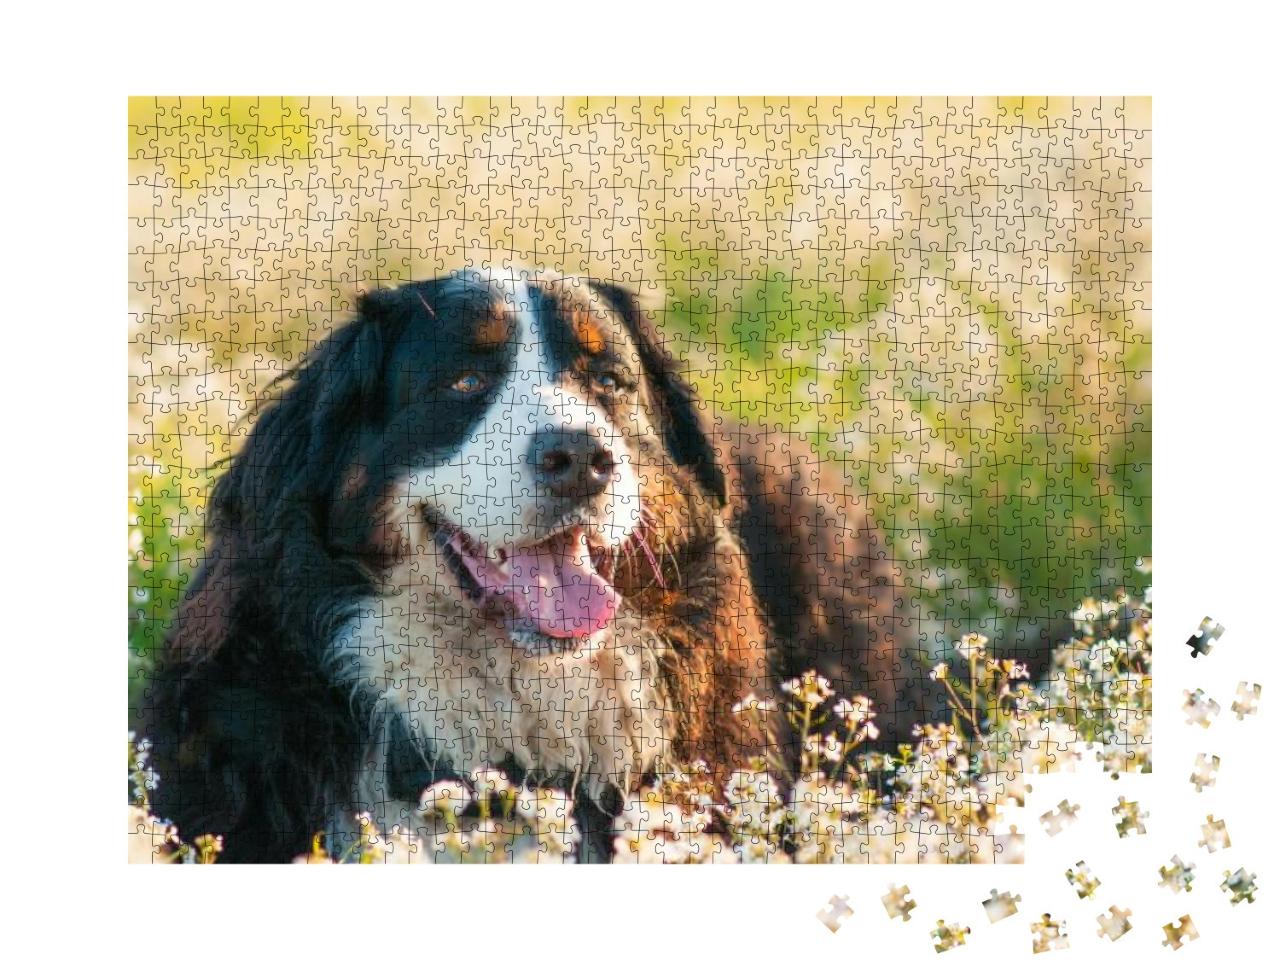 Bernese Mountain Dog in the Meadow Full of Flowers... Jigsaw Puzzle with 1000 pieces